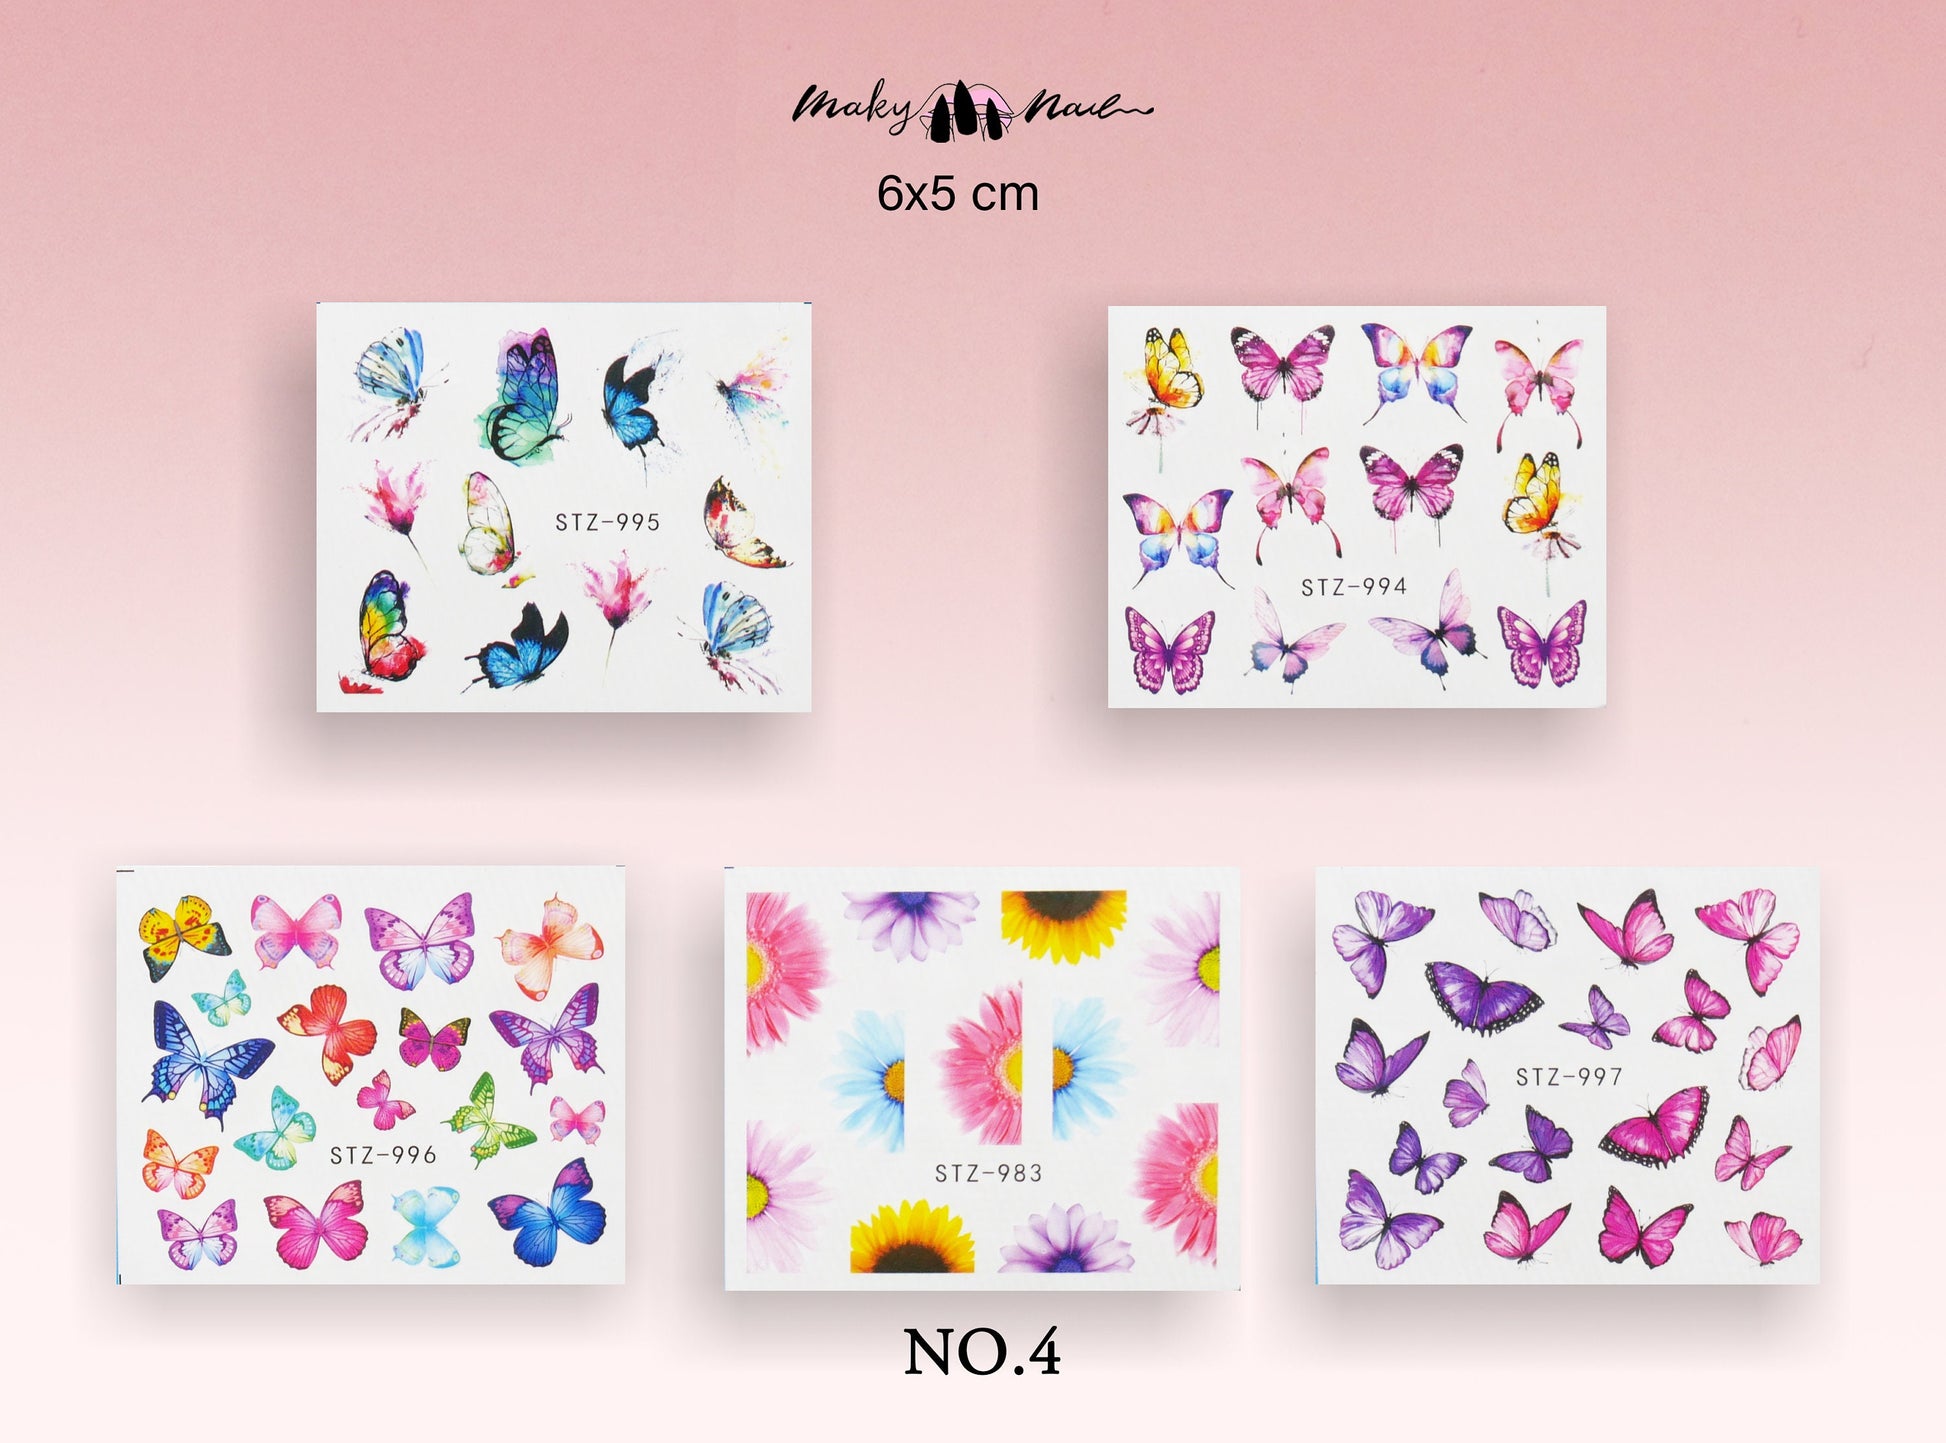 5pcs Butterfly Nail Tattoos/ Blue Morpho Monarch Water transfer nail sticker/ Fairy Tale Theme nail sticker Tattoos/ Nail decal supply